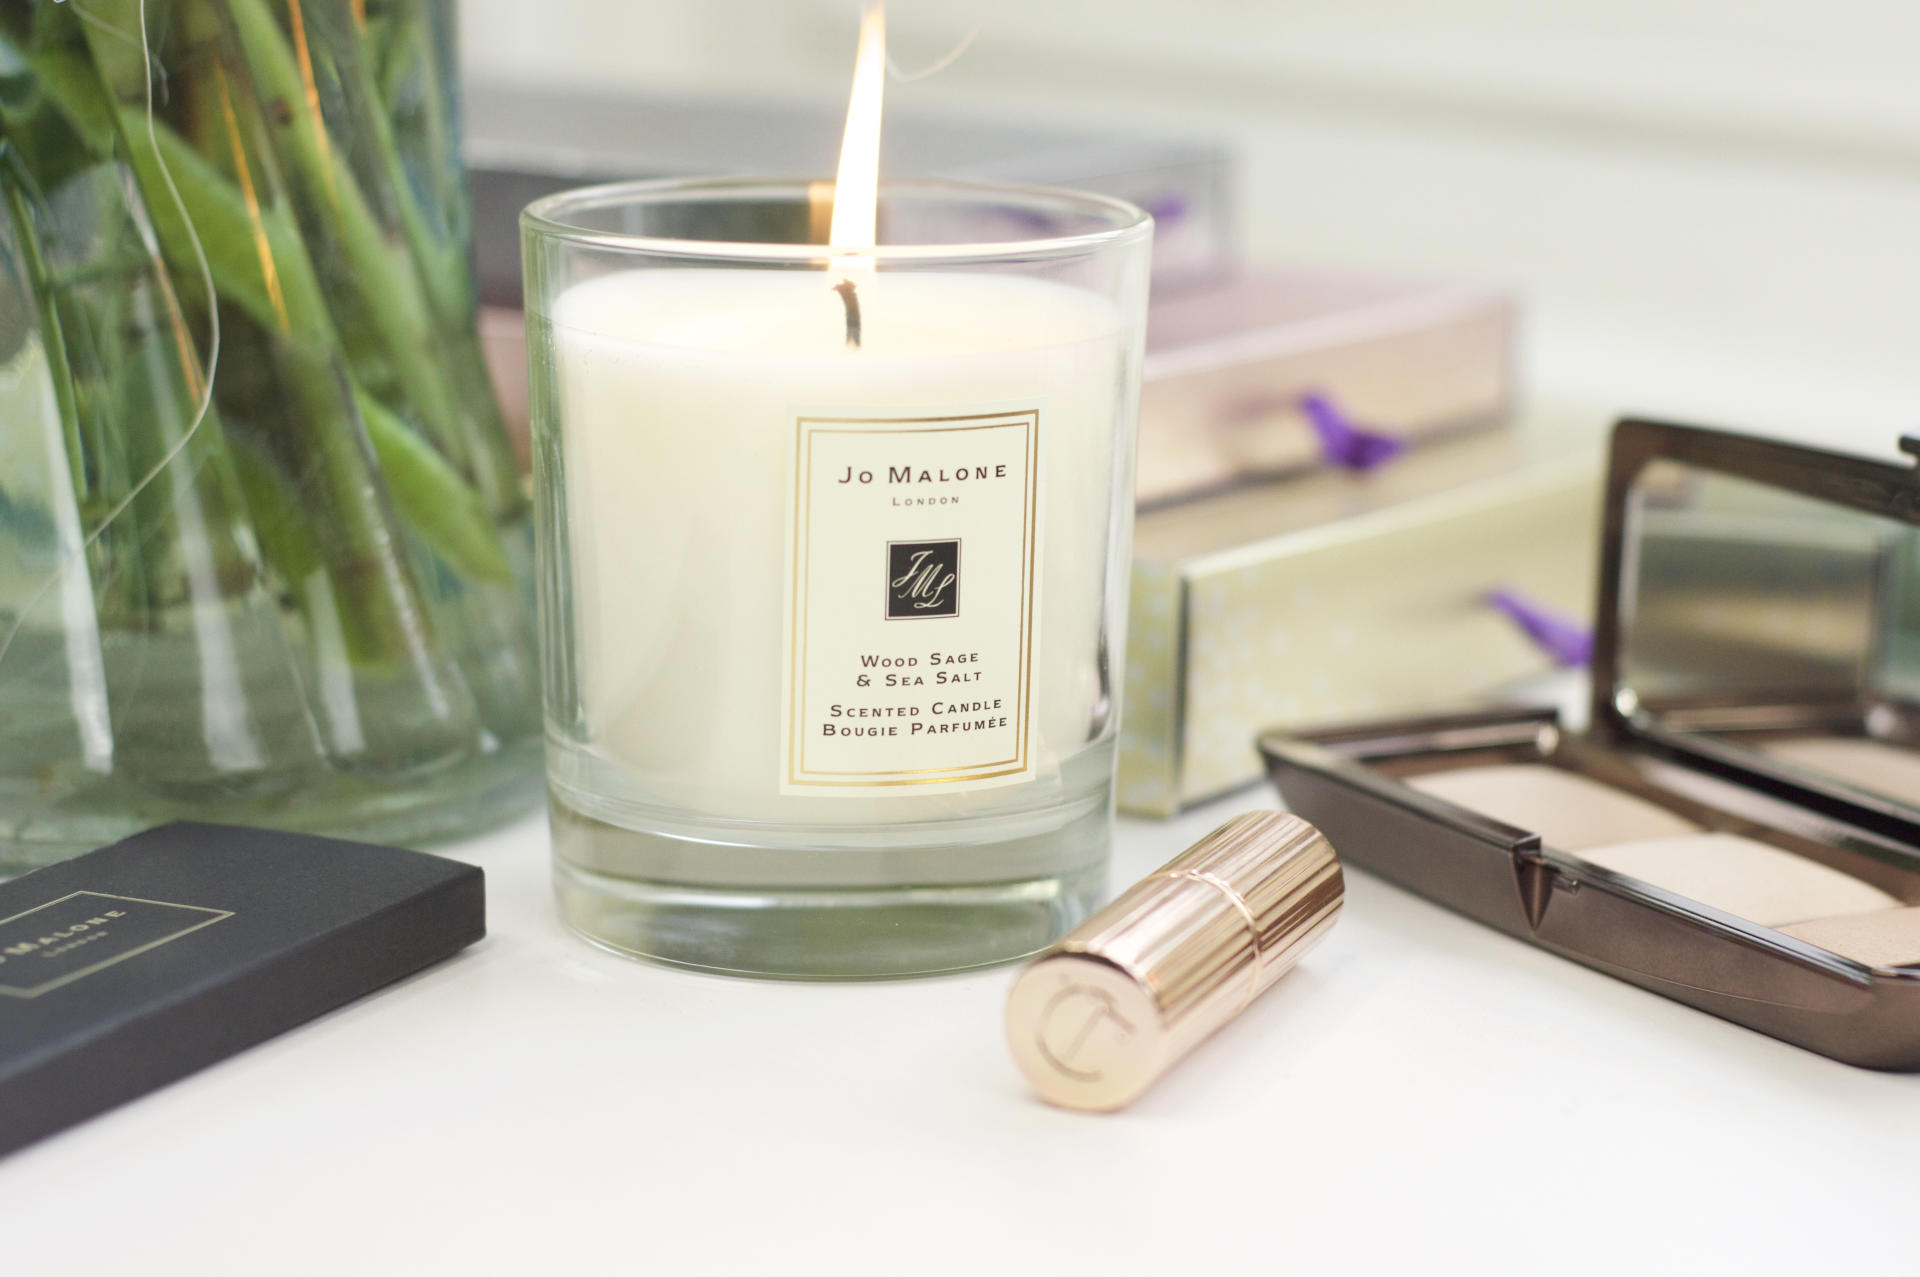 Made From Beauty Woodsage and Sea Salt candle by Jo Malone